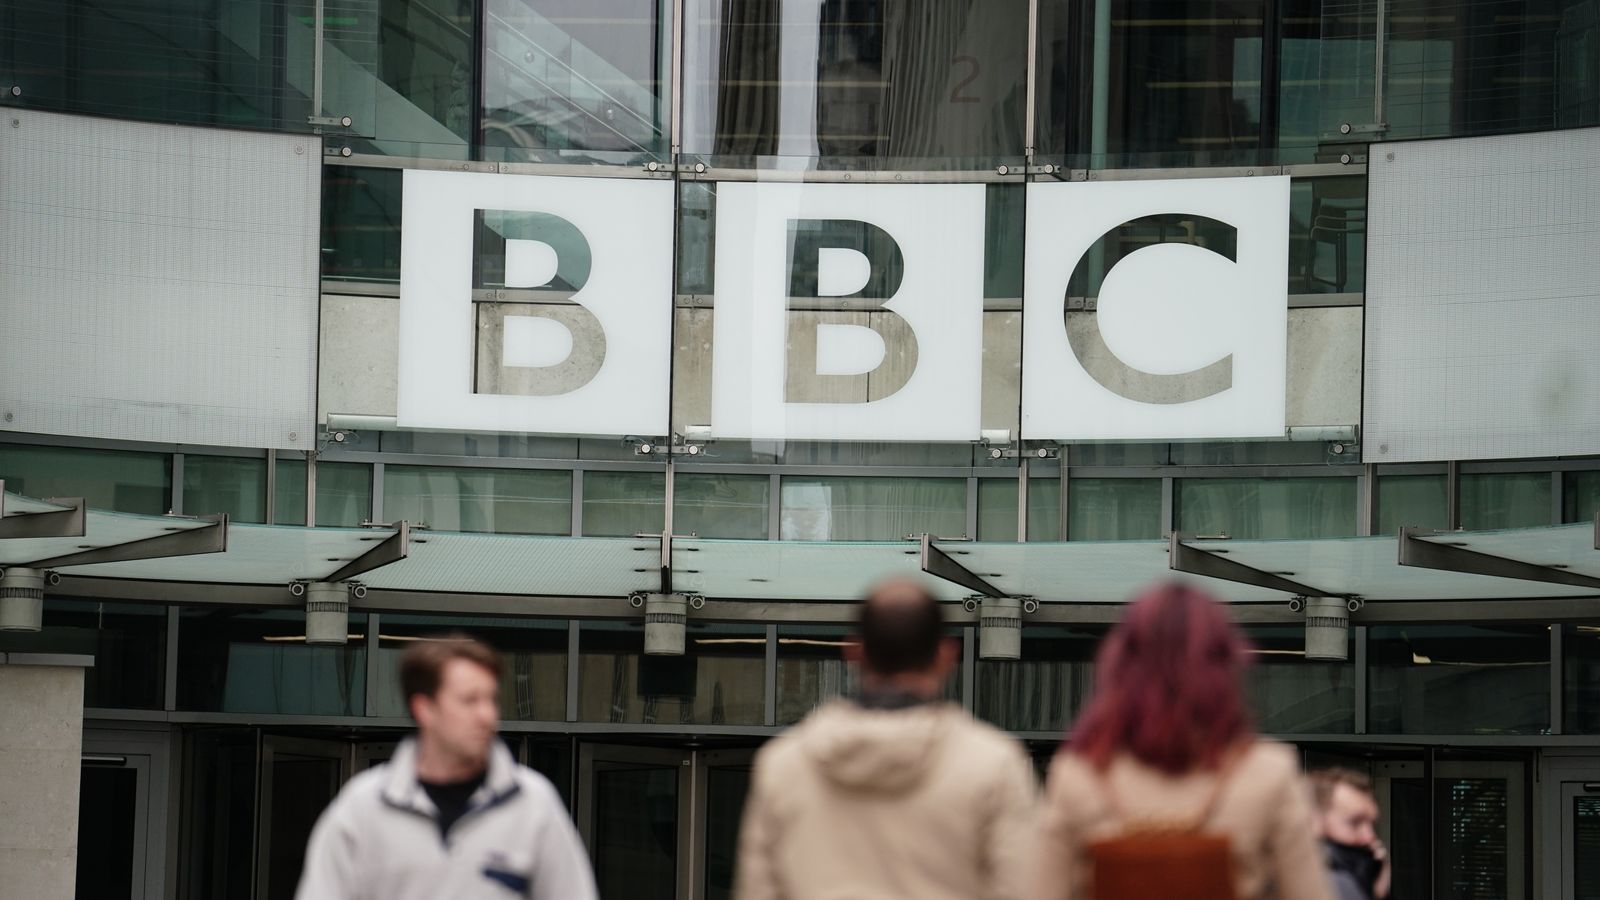 BBC presenter accused of paying teen for sexually explicit photos 'tried to stop investigation after story broke'